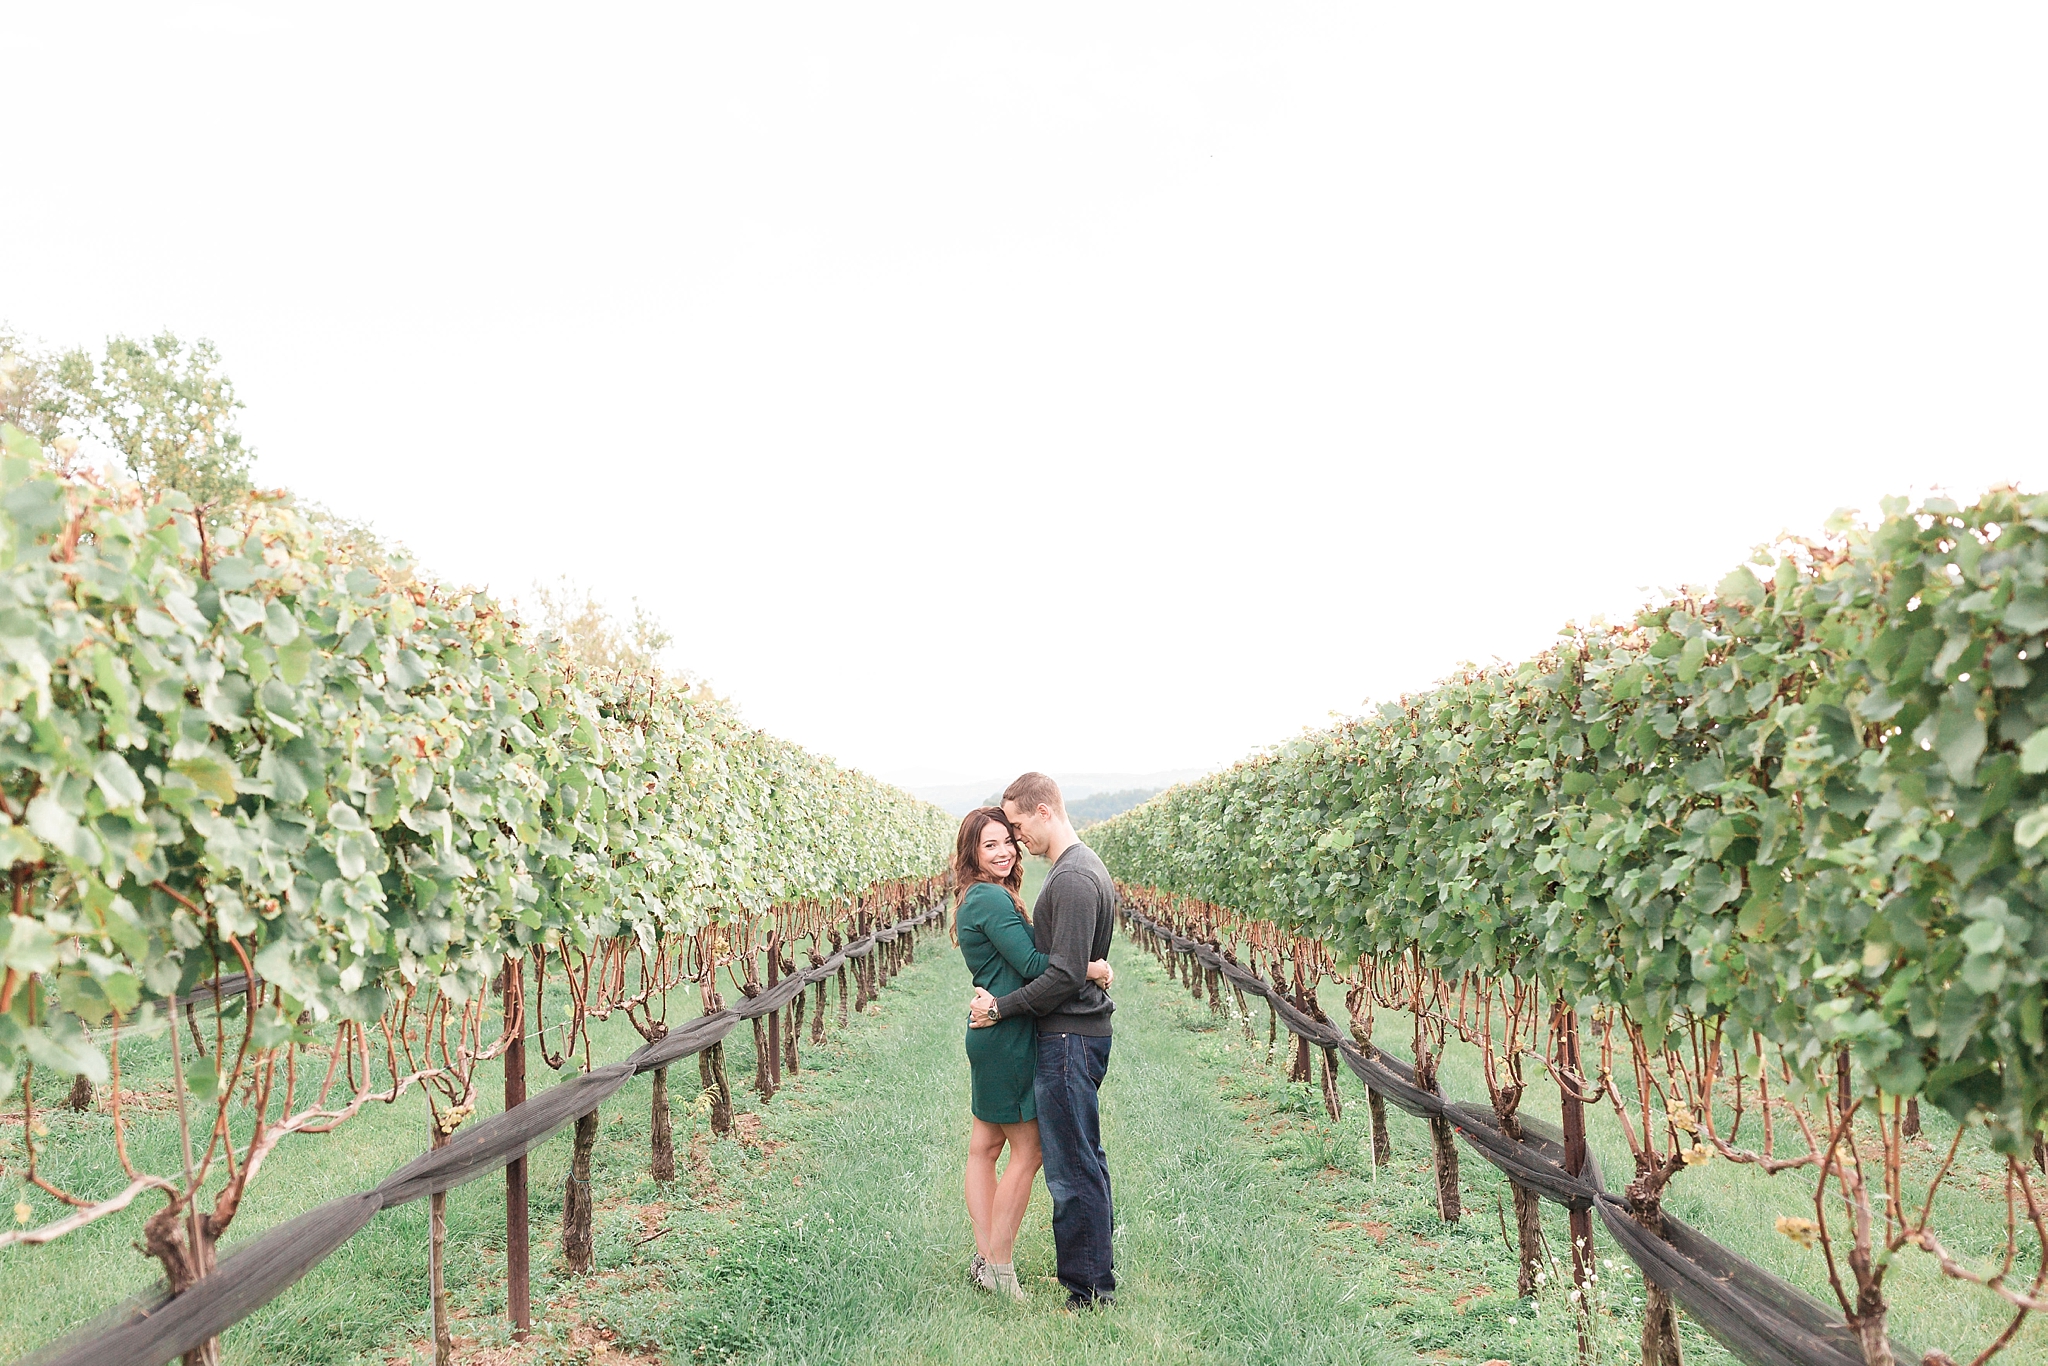 A romantic fall engagement photo session at Stone Tower Winery, a popular vineyard in Leesburg, VA.